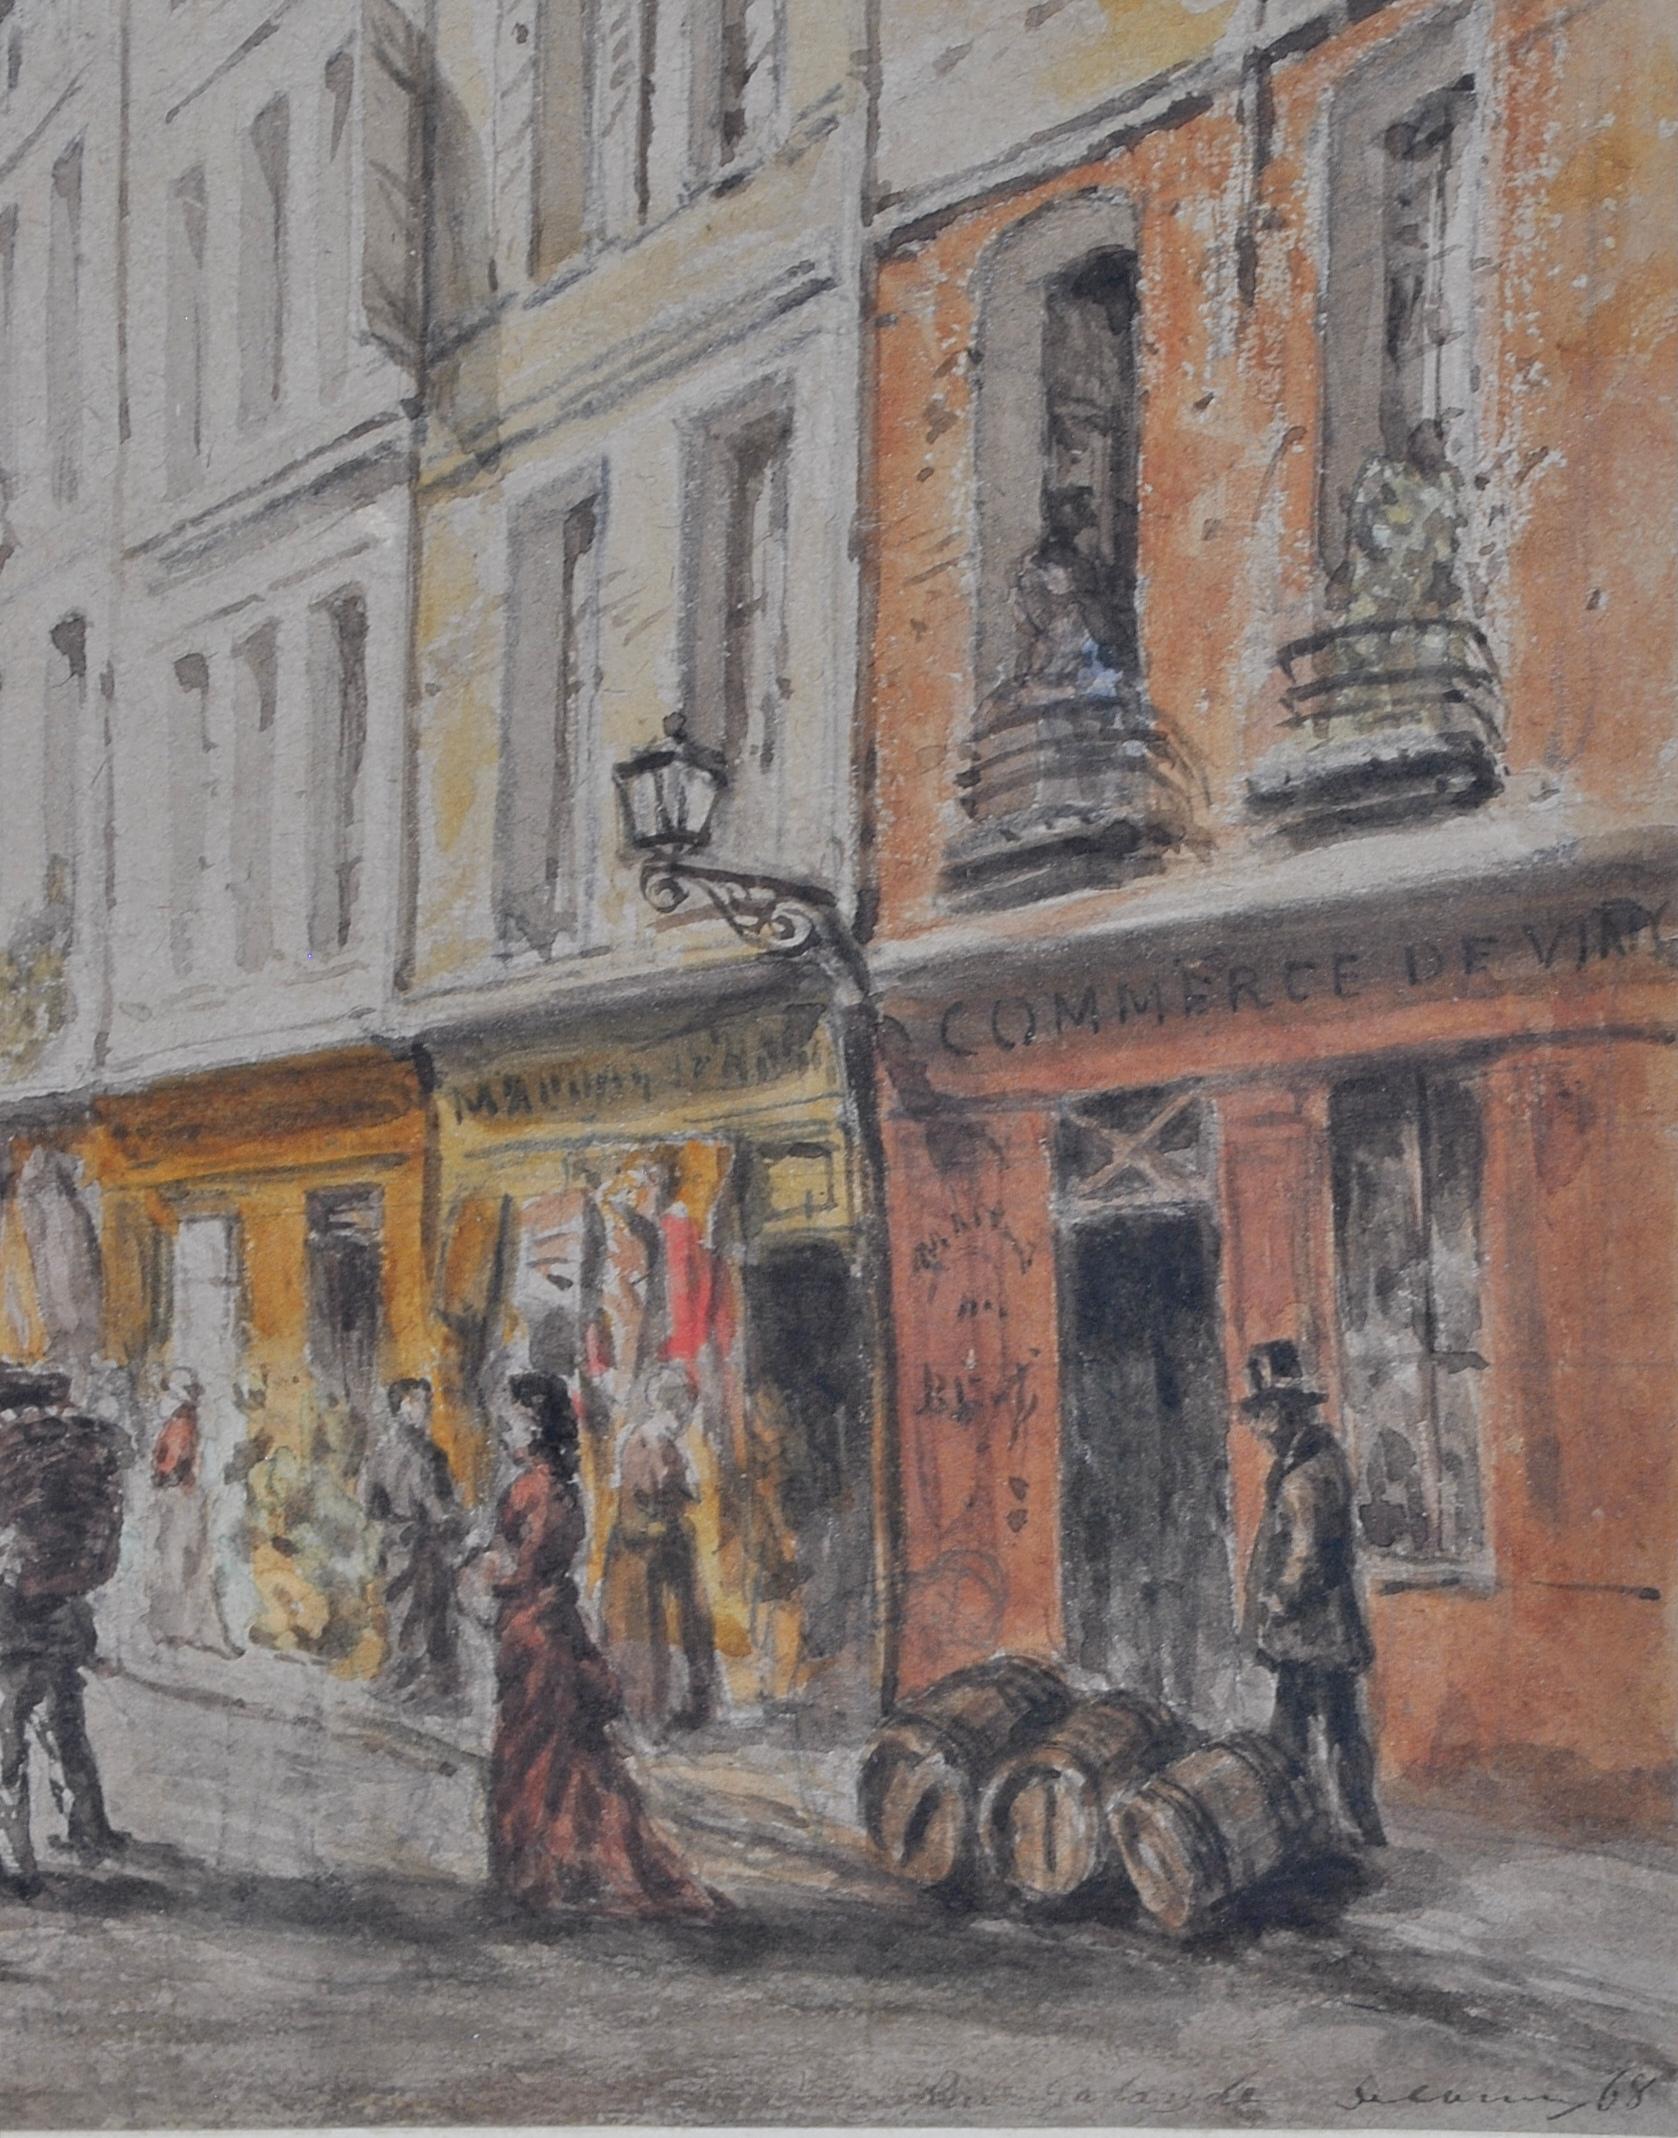 A fine signed and dated 1868 watercolour and pencil on laid paper depicting a bustling scene on Rue Galande in the 5th arrondissement of Paris, by Alfred-Alexandre Delauney. Excellent quality work by this notable etcher and painter who is said to